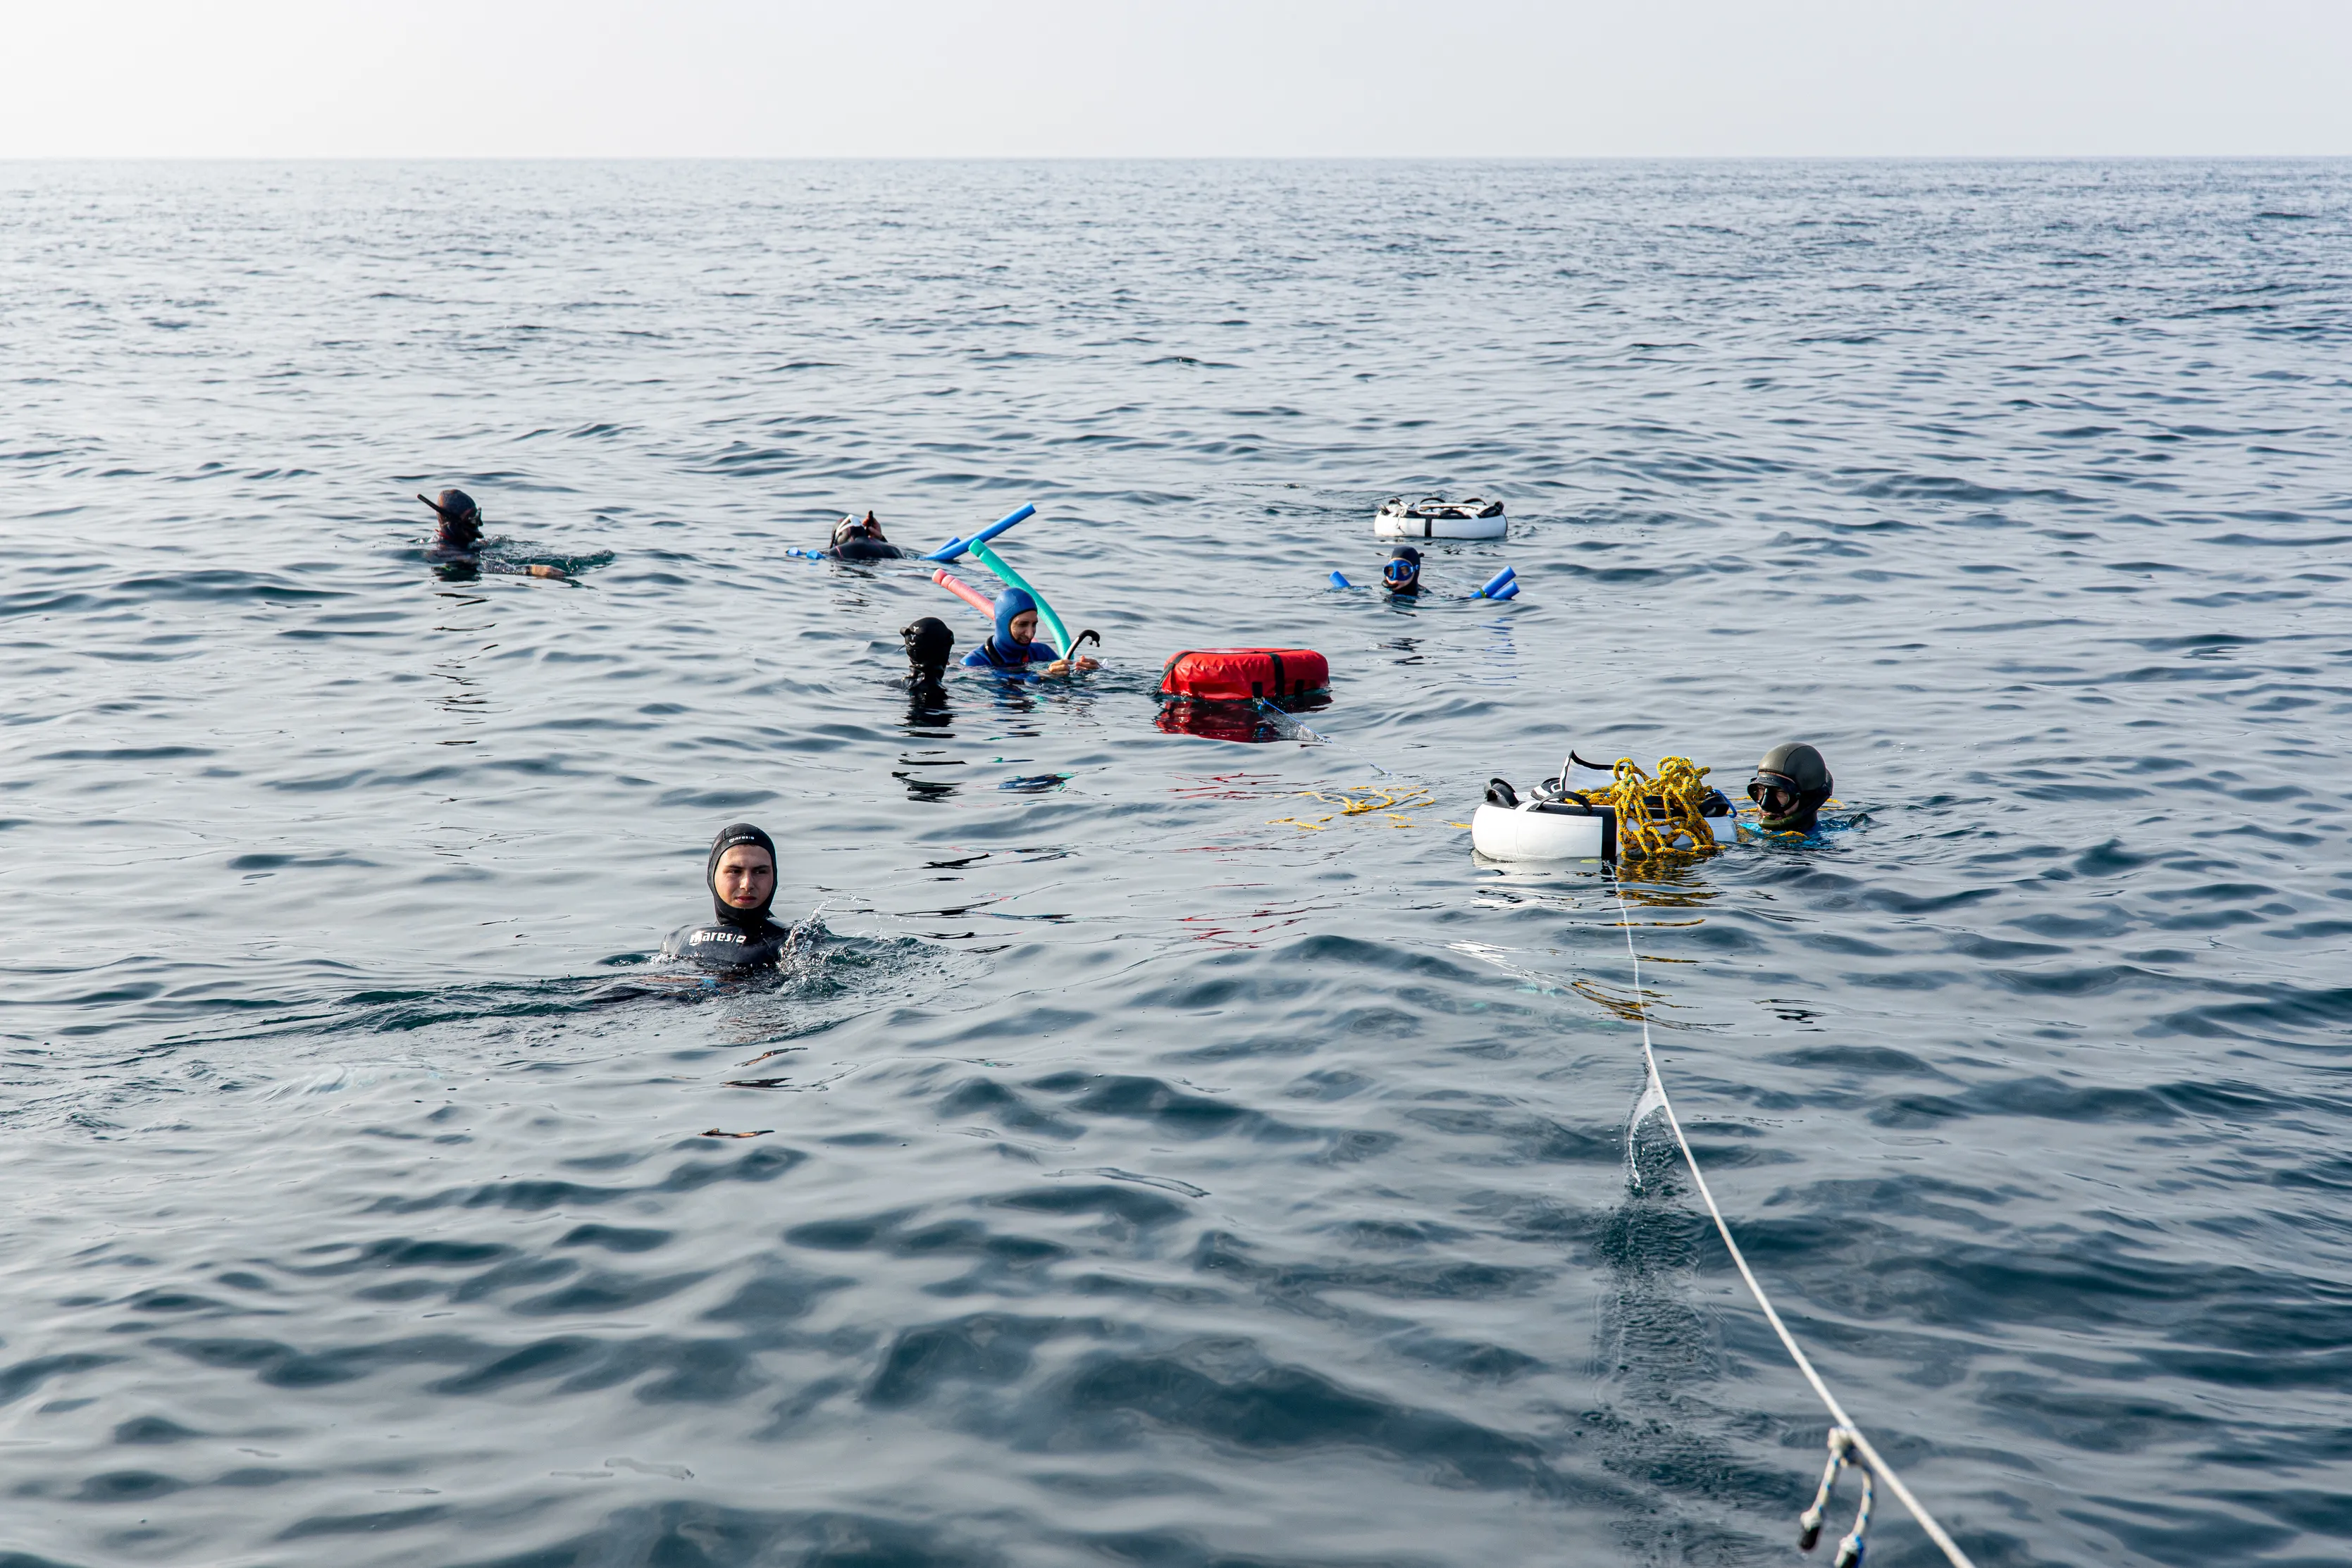 A group of freedivers are training in the sea in Dubai, UAE.